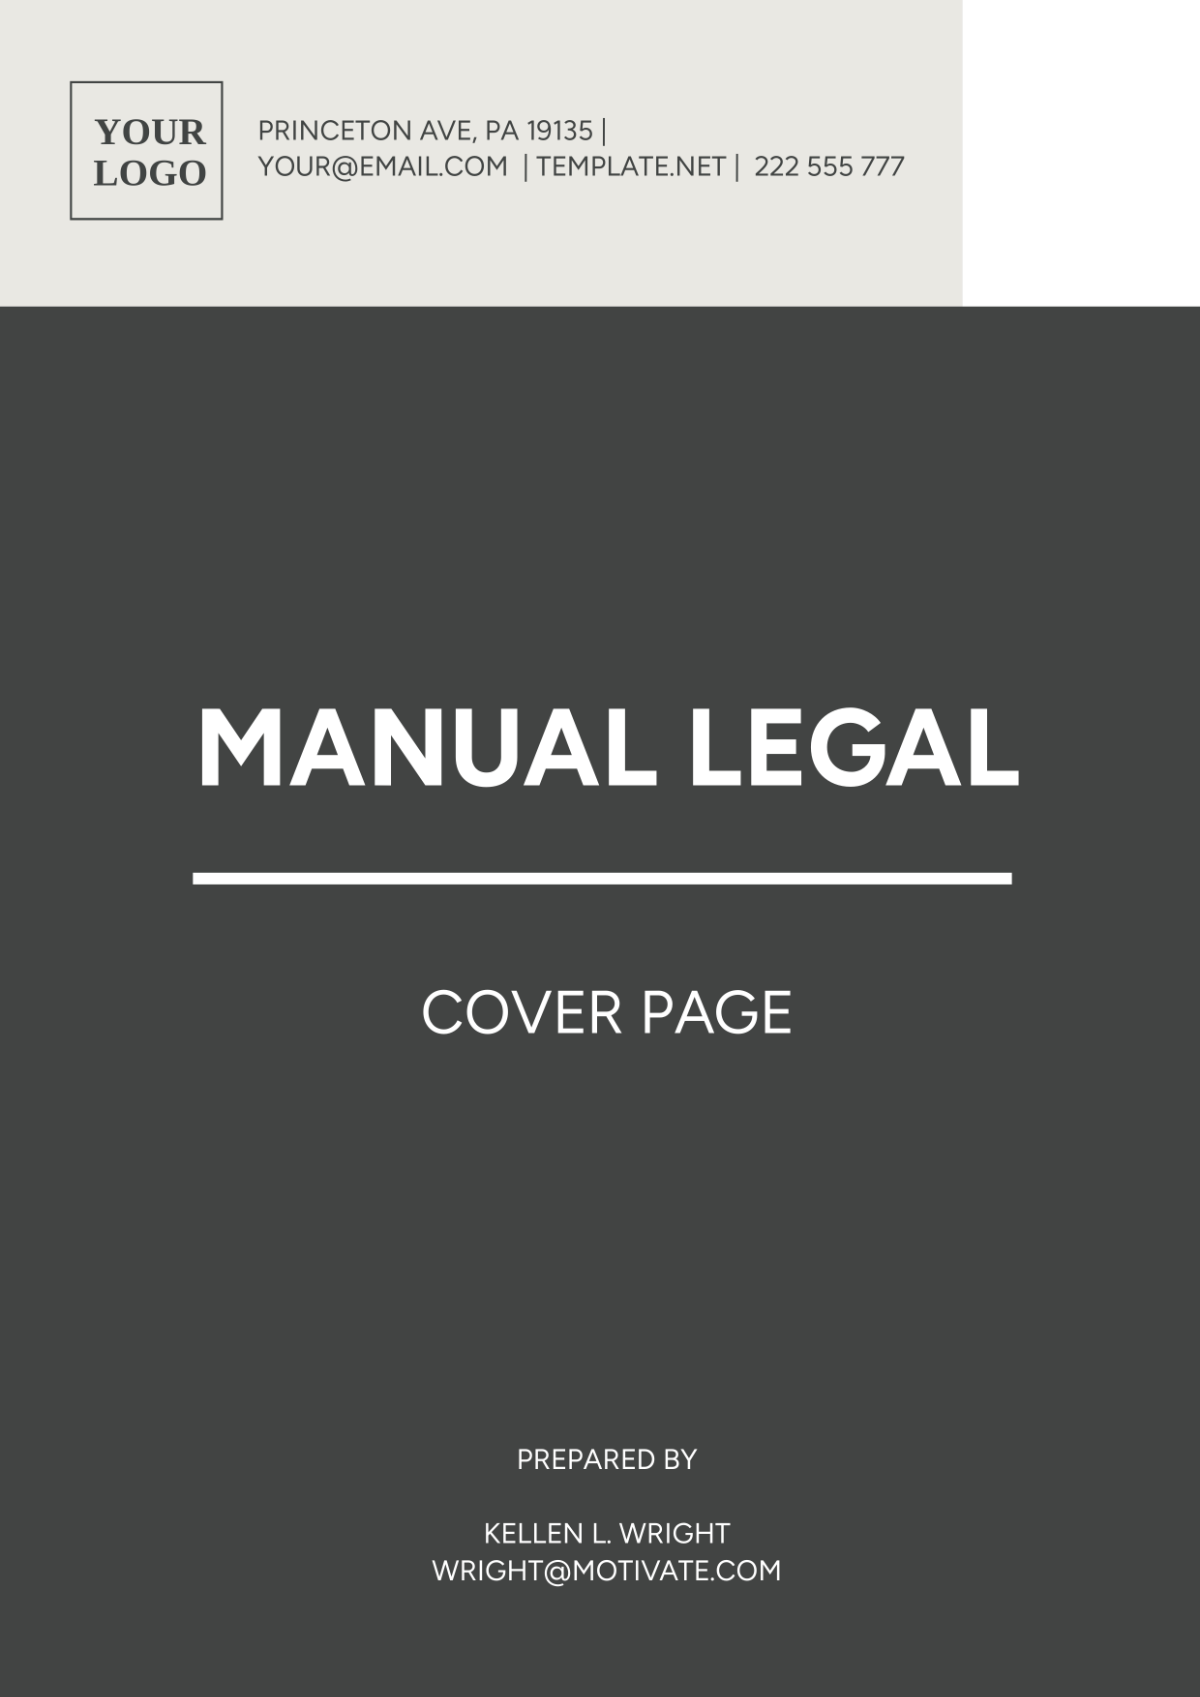 Manual Legal Cover Page Template